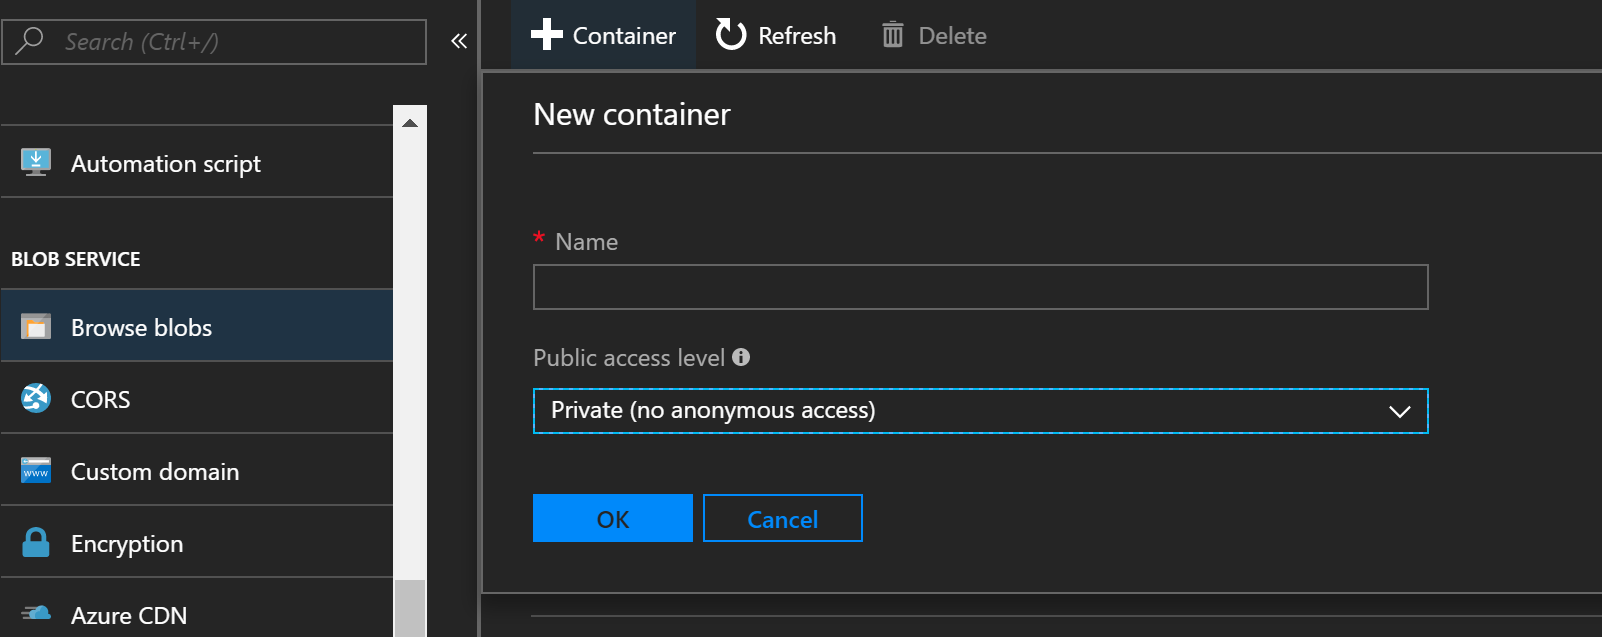 Creating a new storage account container